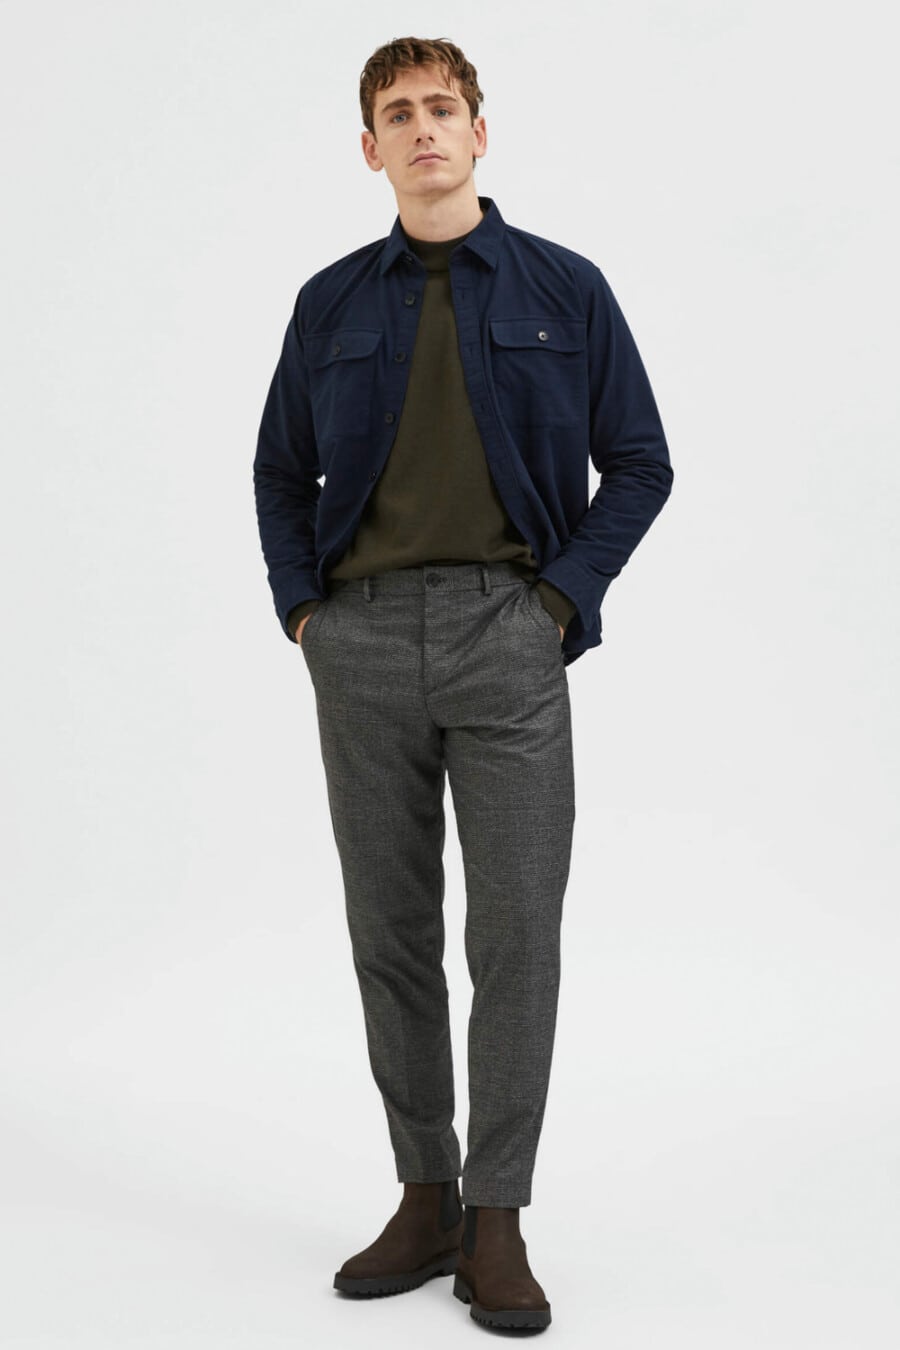 Men's grey wool pants, green long-sleeve top, navy blue shacket and brown chunky leather Chelsea boots outfit